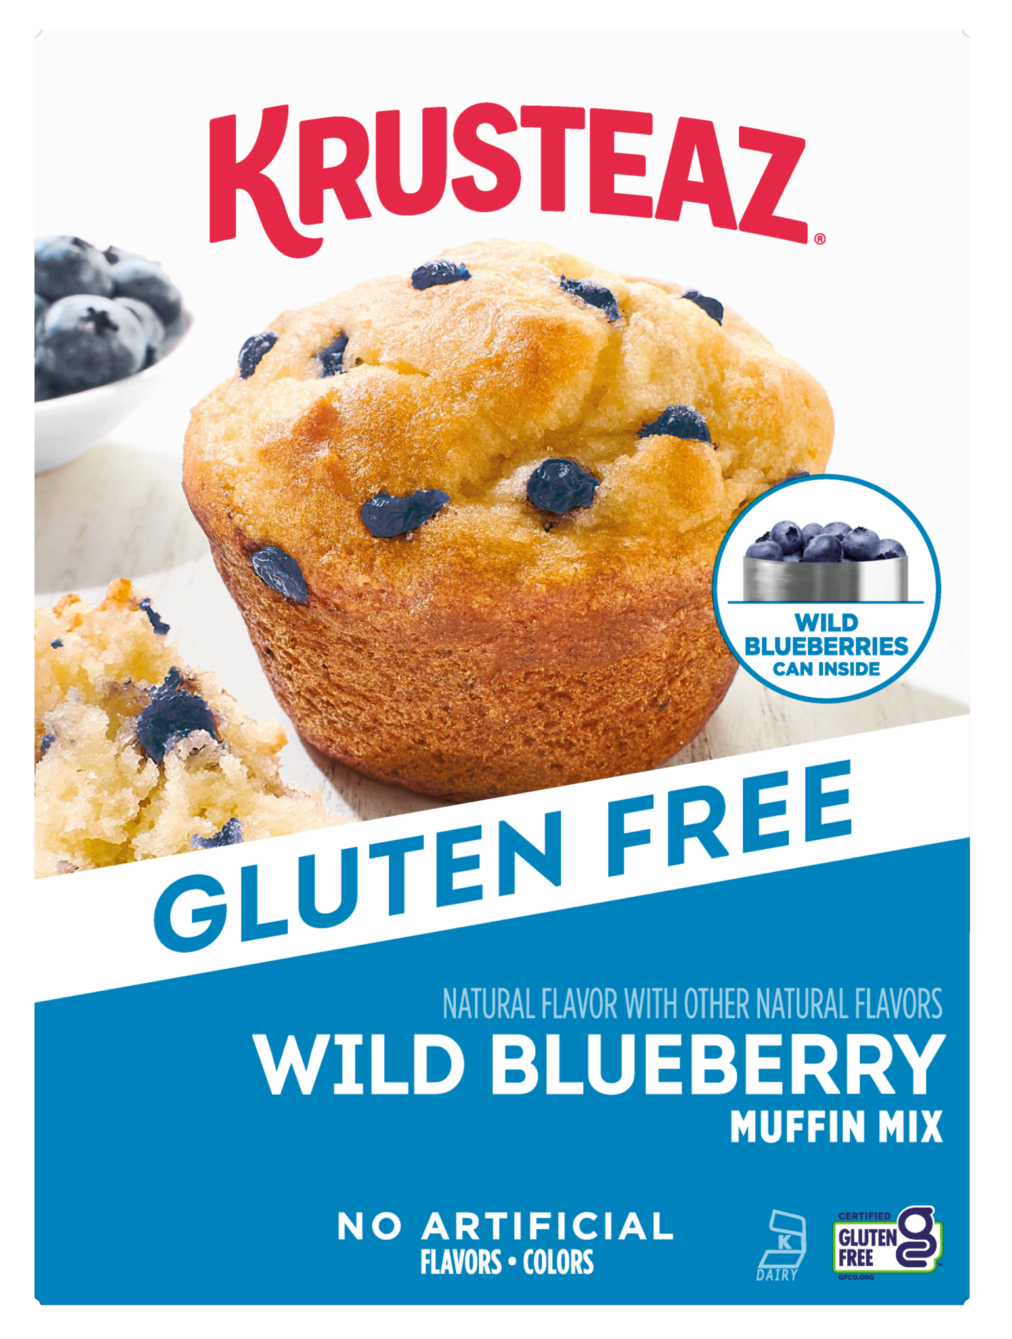 Grain Free Blueberry & Cinnamon Recipe Biscuits, 16 oz at Whole Foods Market